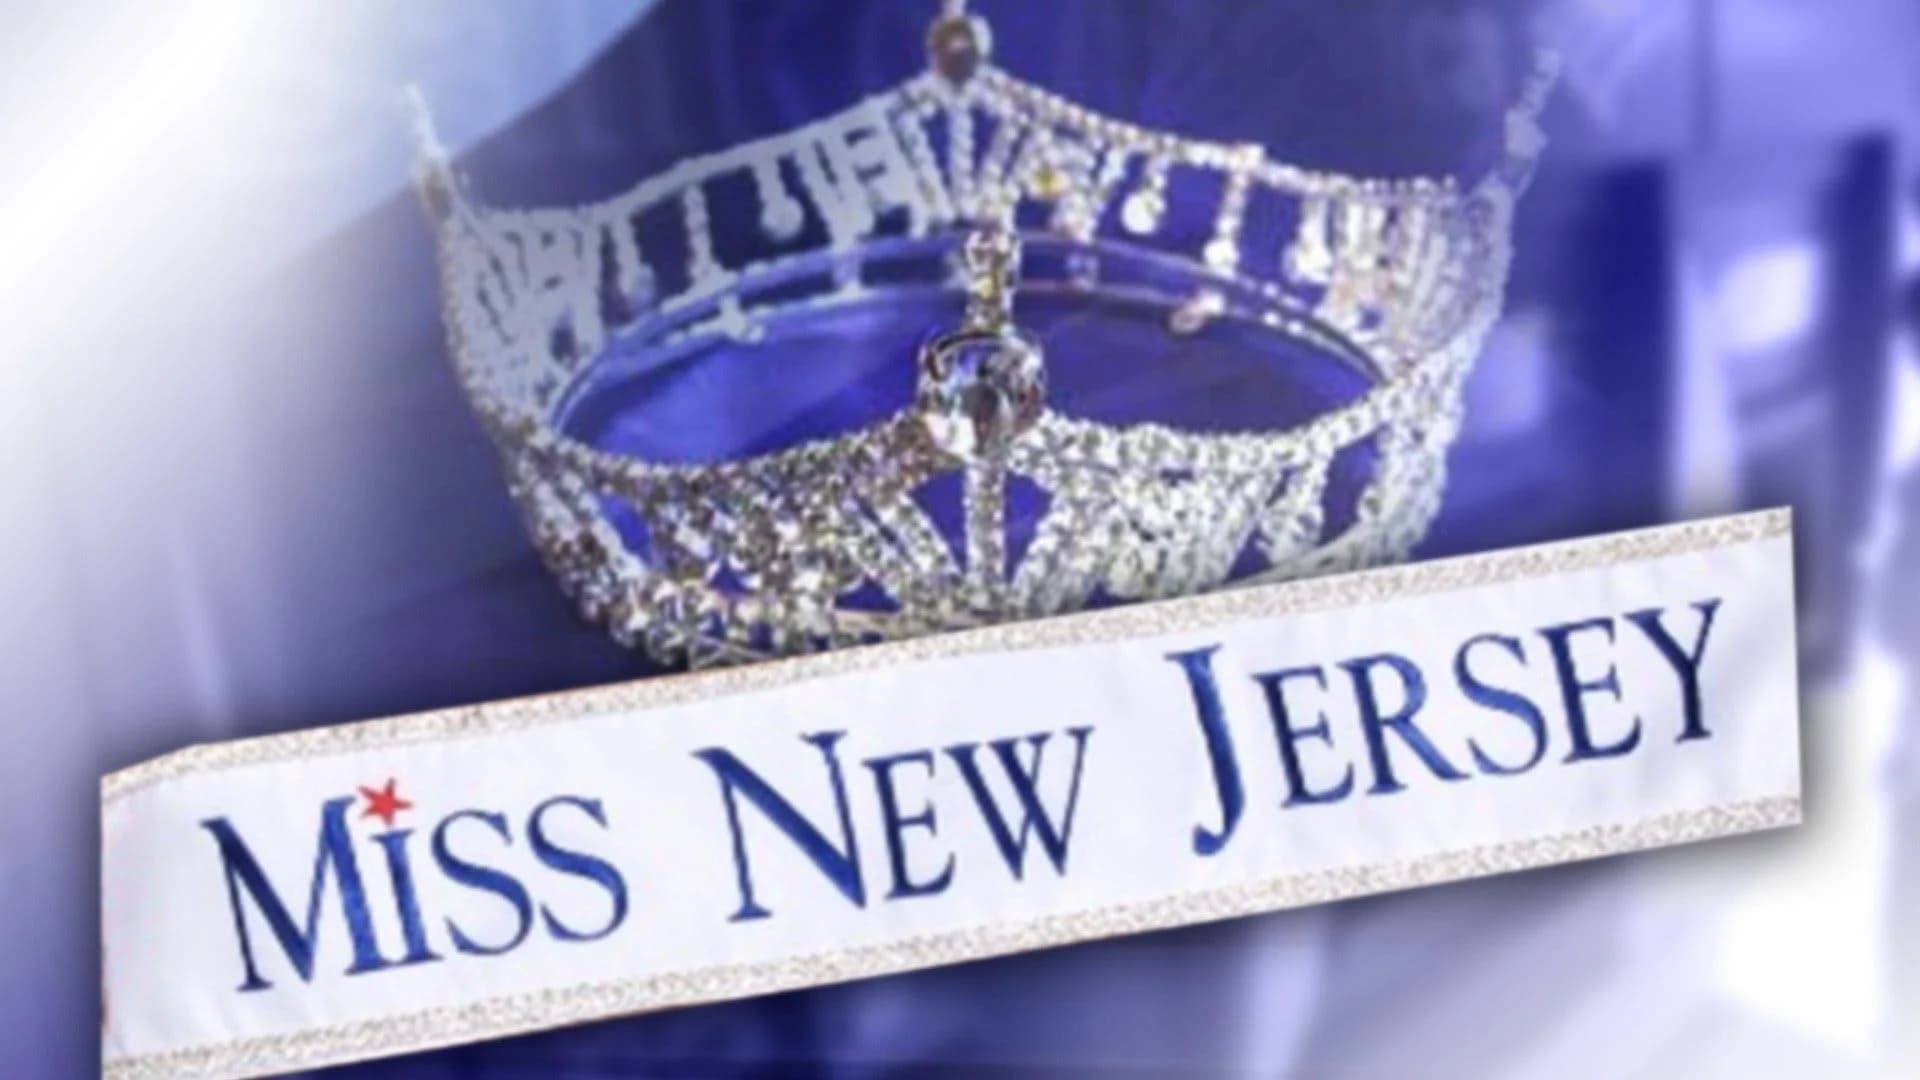 Gloucester County resident crowned Miss New Jersey